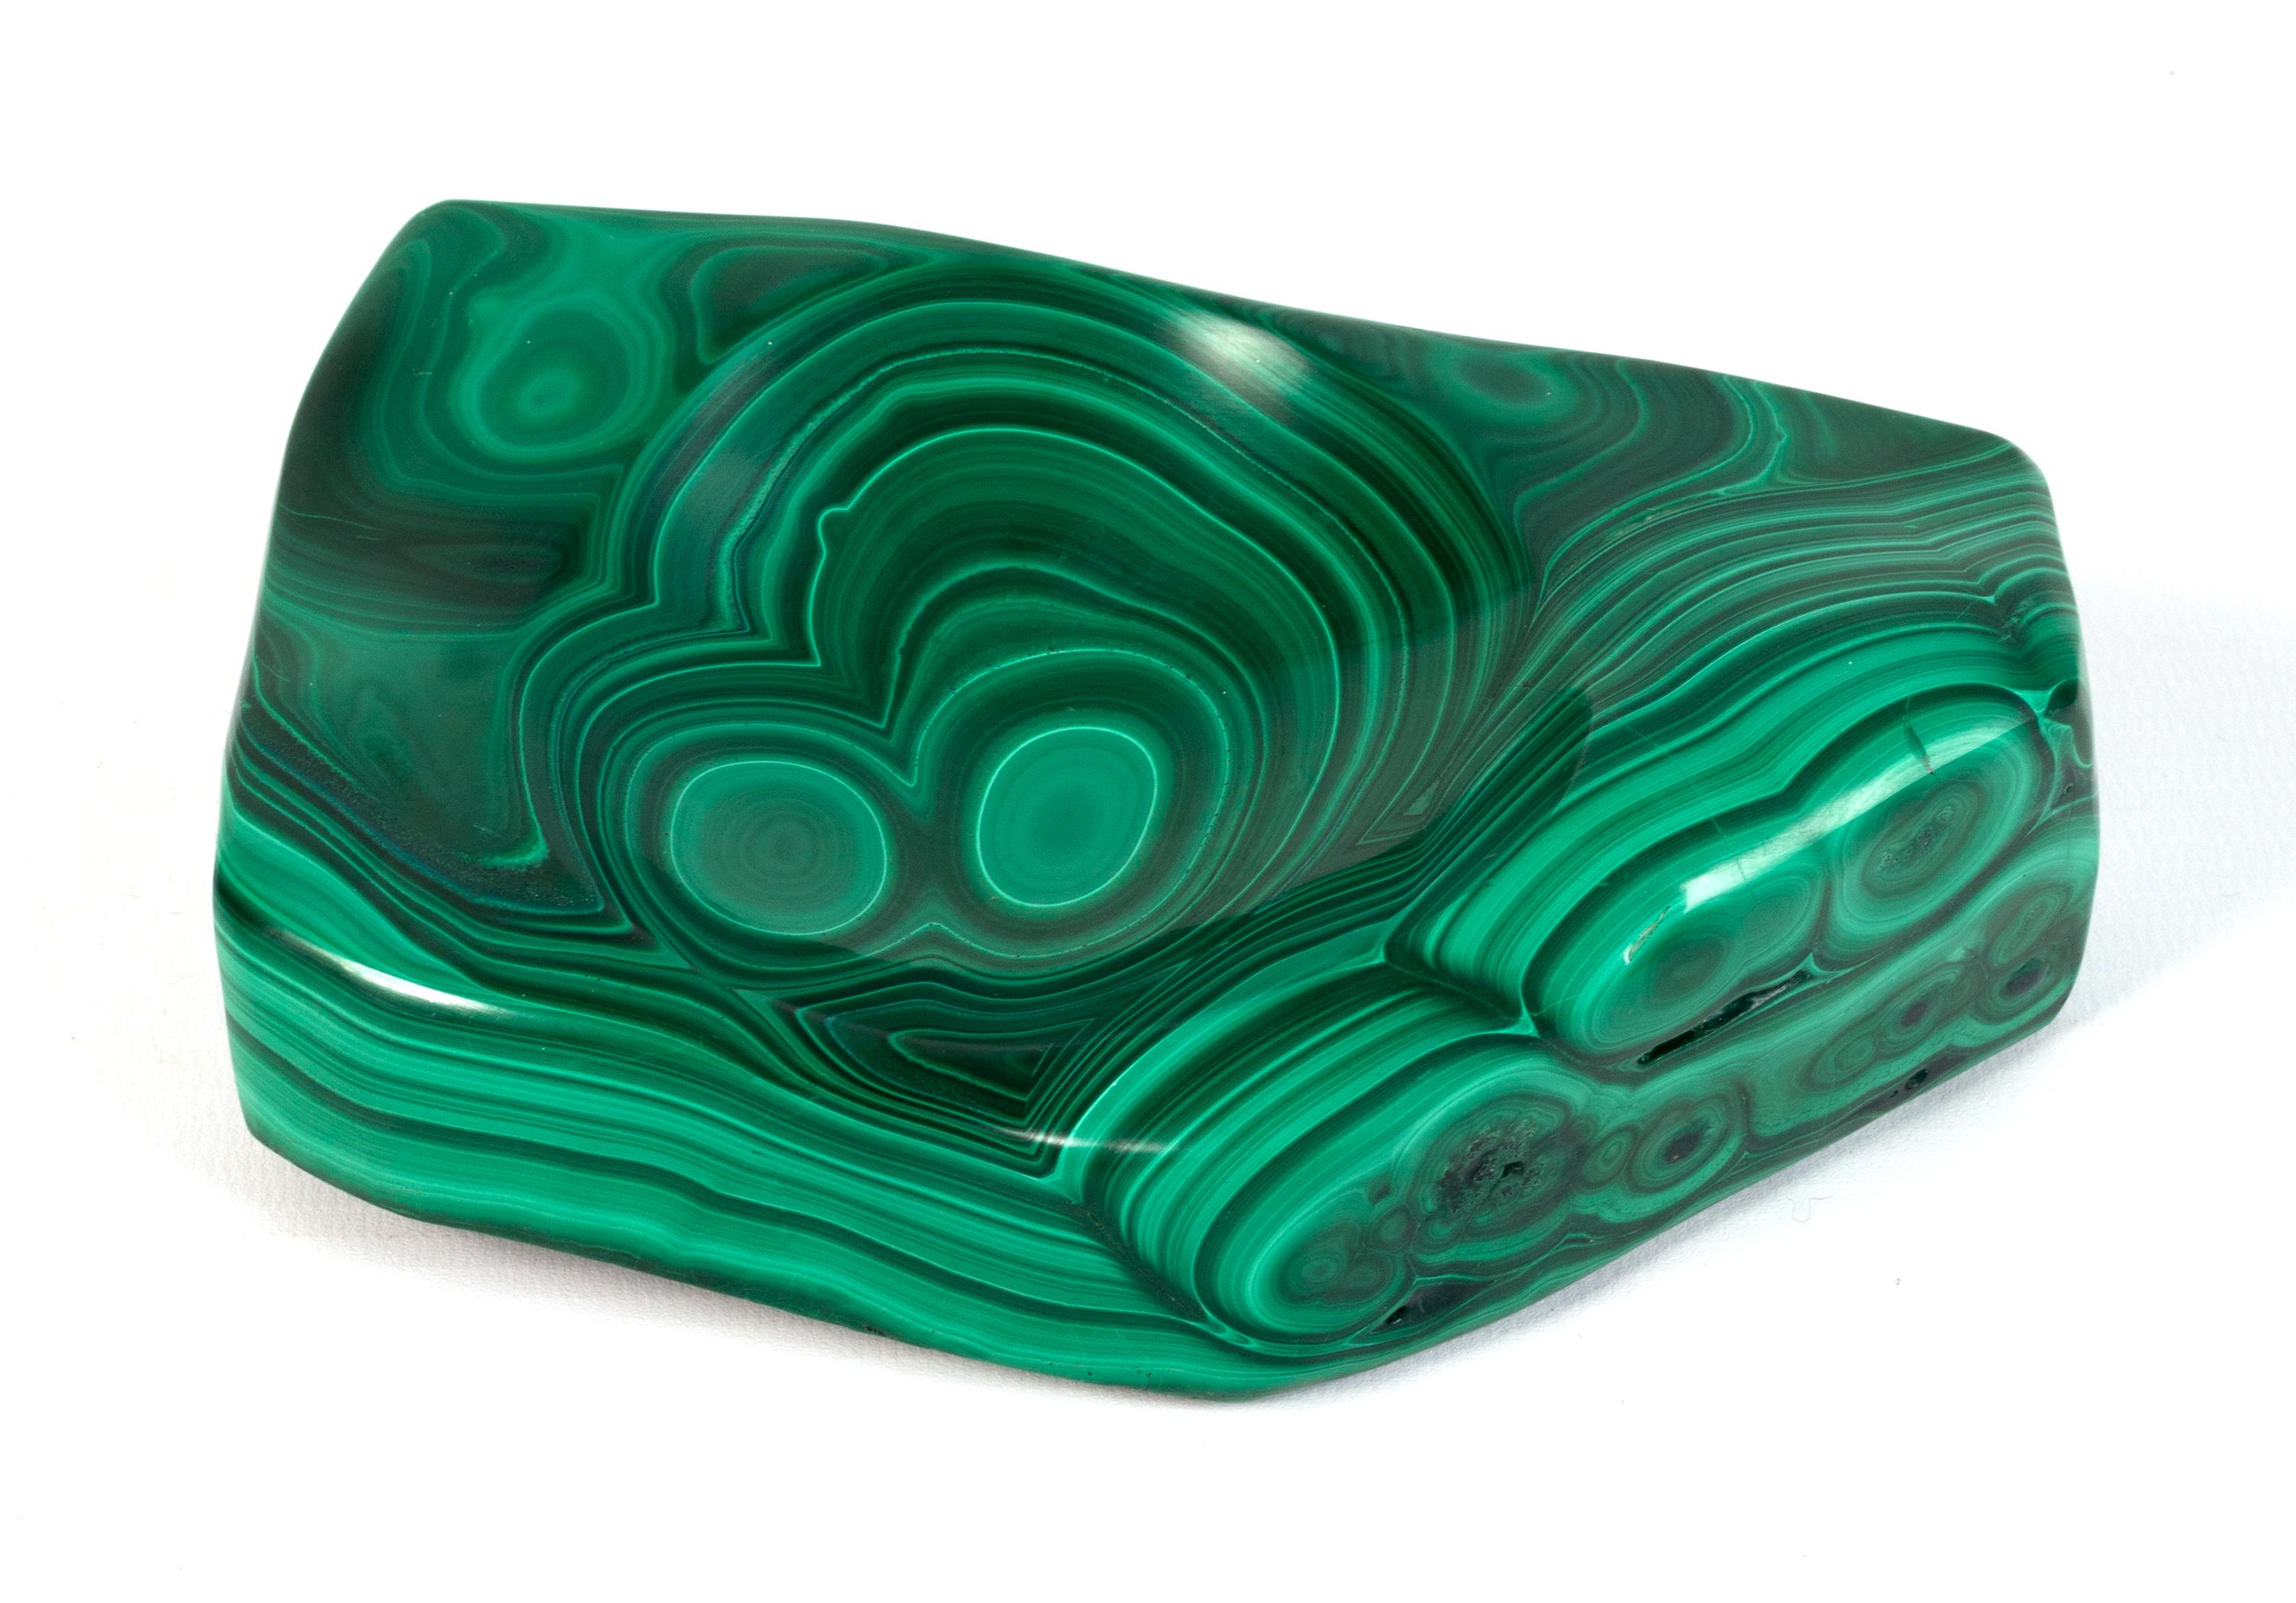 An Early 20th Century Malachite Vide Poche Dish Italy, C.1940.

A substantial piece of all natural malachite mineral stone (Weighing 1.5Kg). Polished beautifully to depict the natural pattern formation of this stunning rock.

In excellent